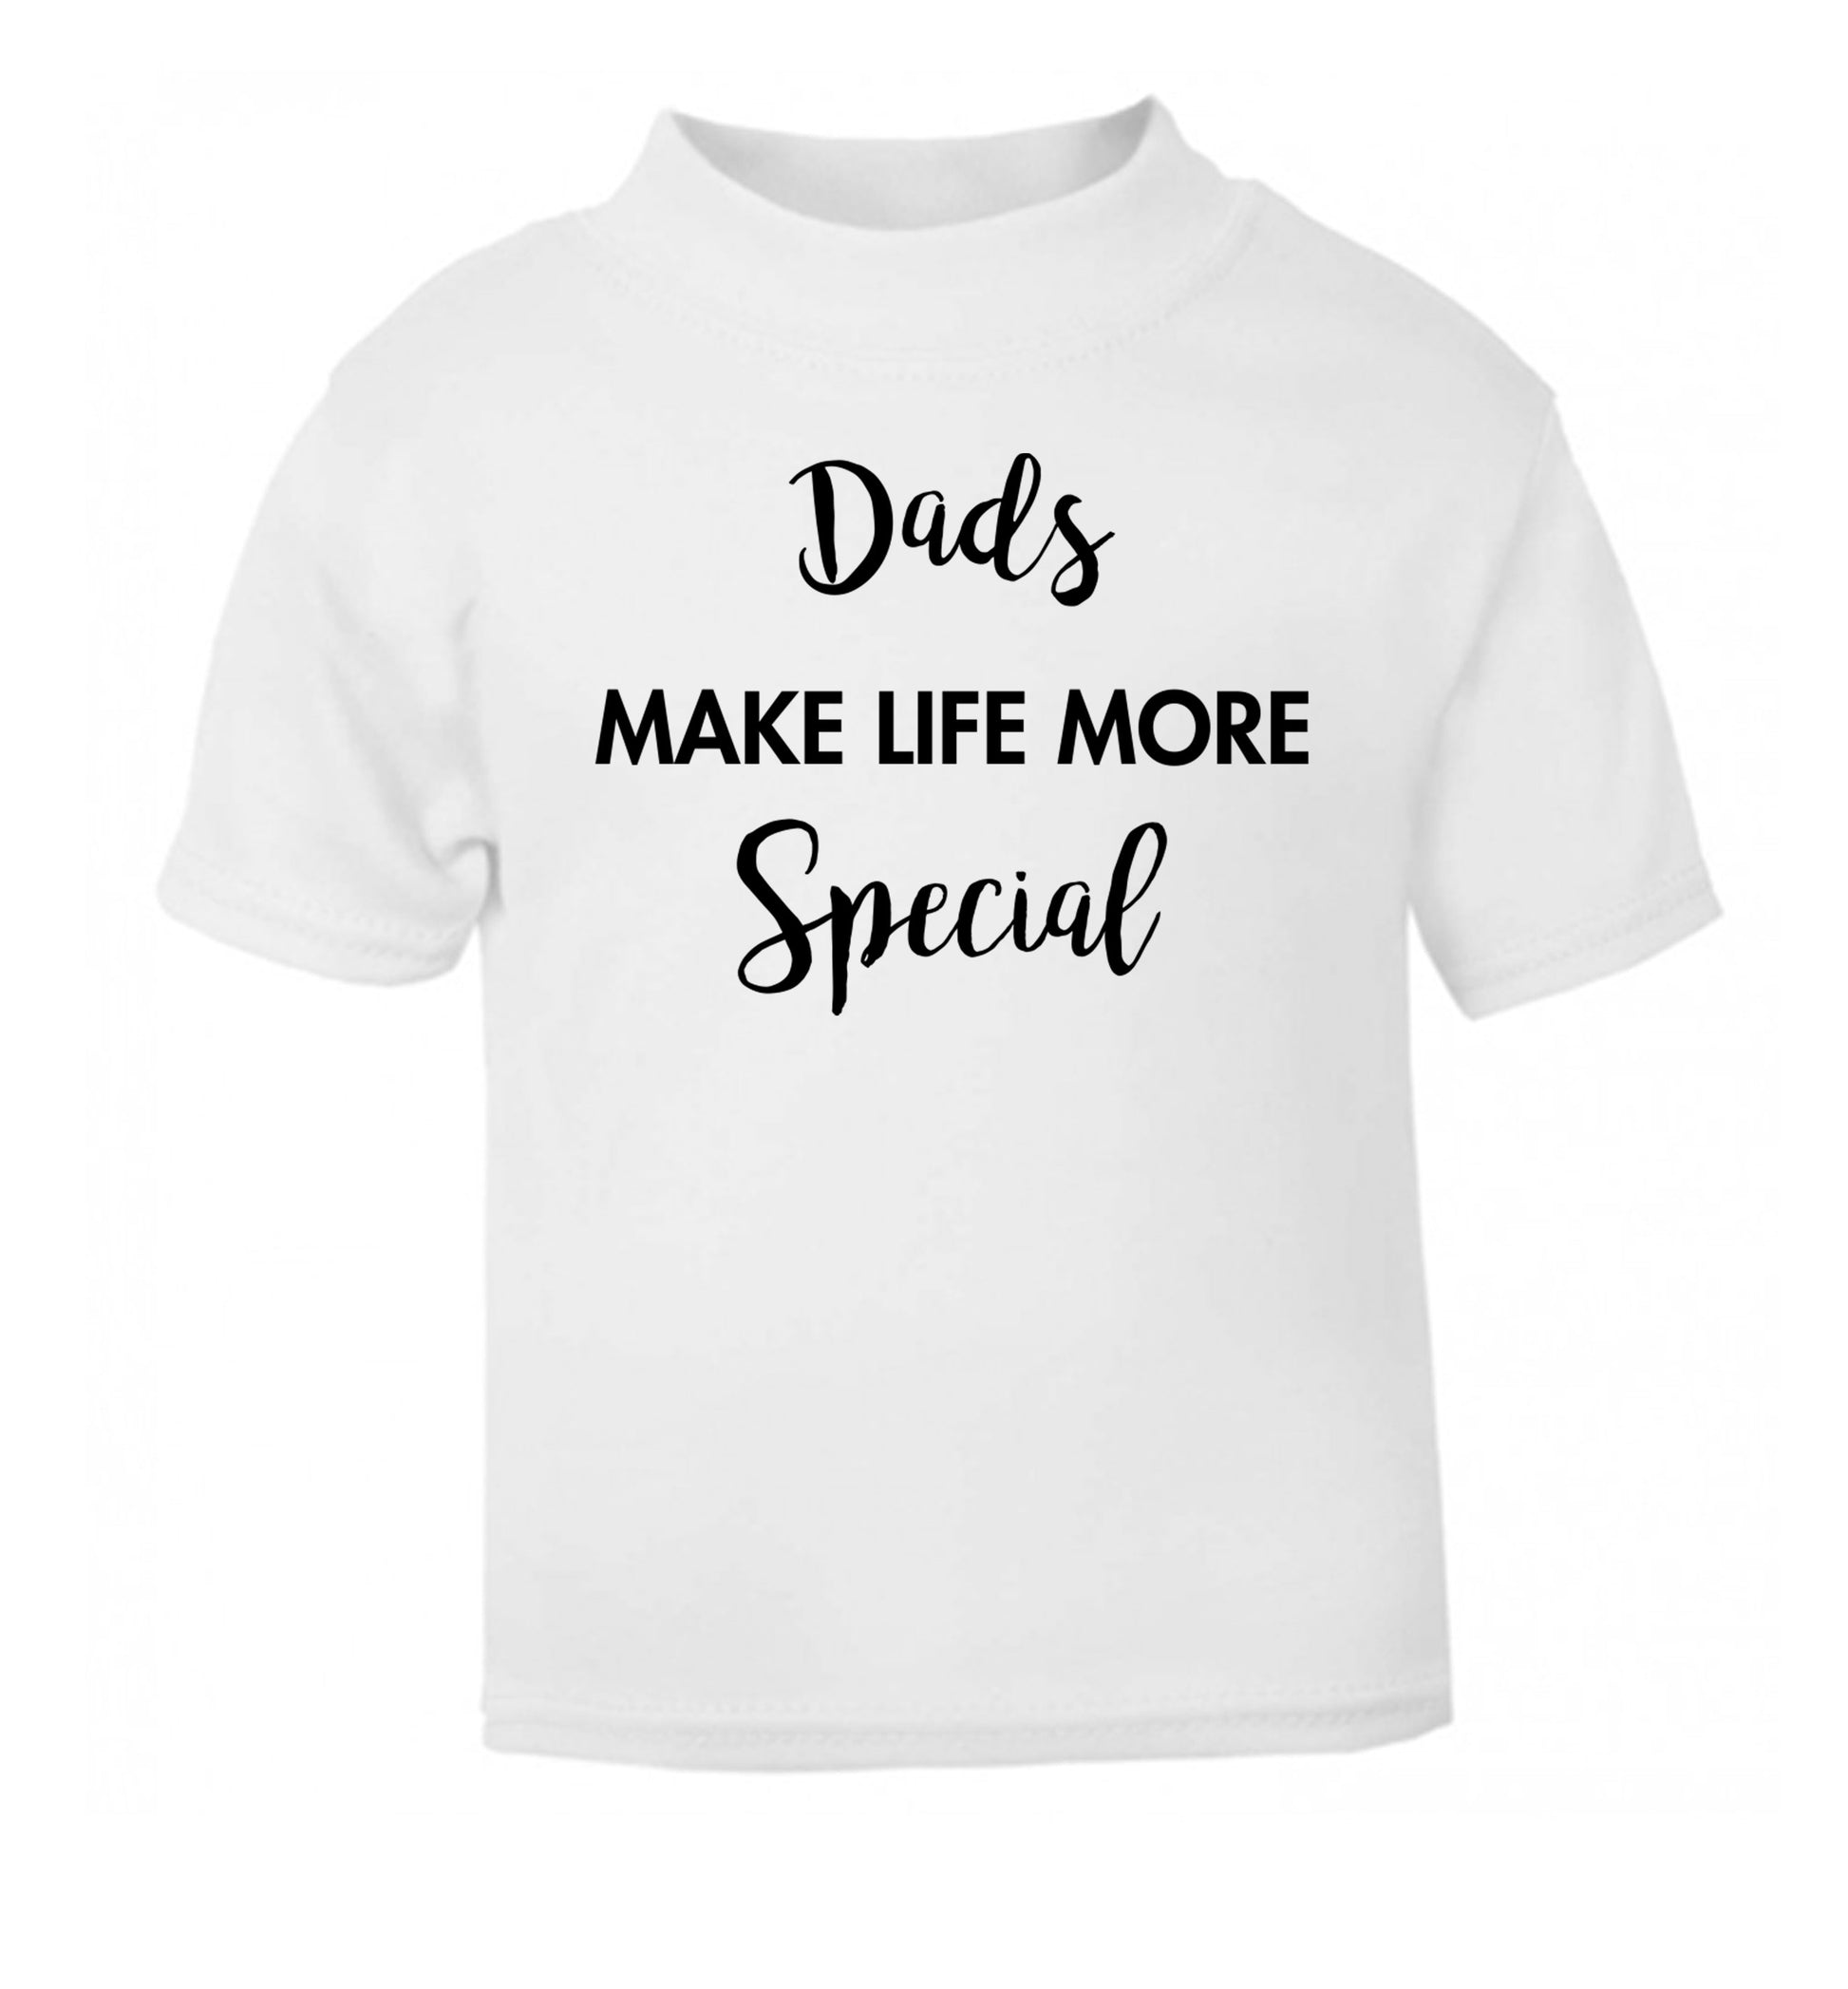 Dads make life more special white Baby Toddler Tshirt 2 Years